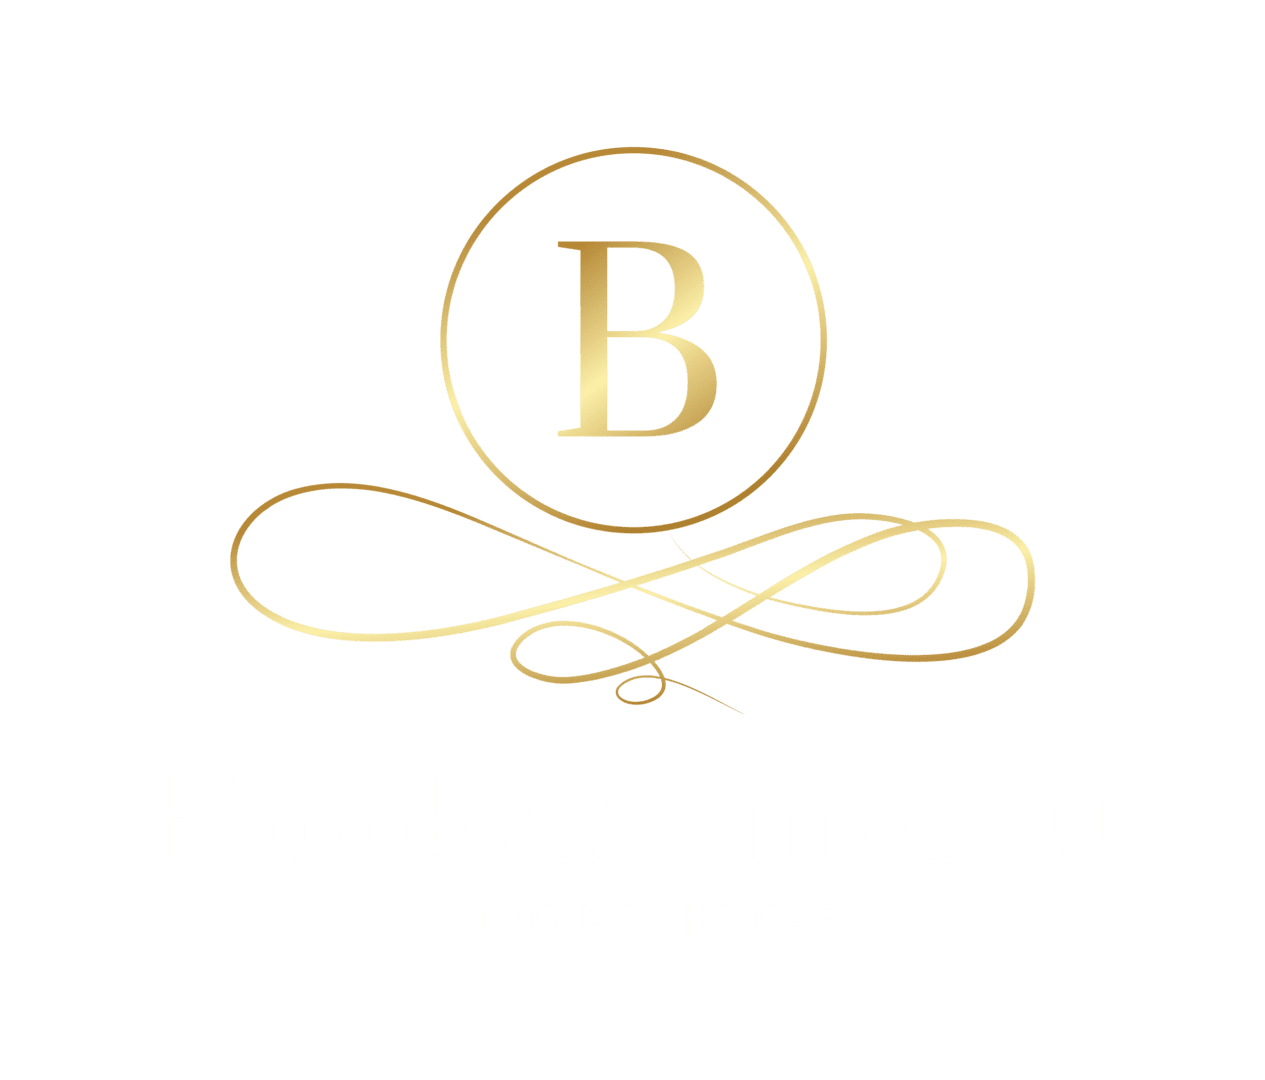 We offer phlebotomy services at home, work, hotels, or other location of your convenience, across Cheshire and Greater Manchester – book now.